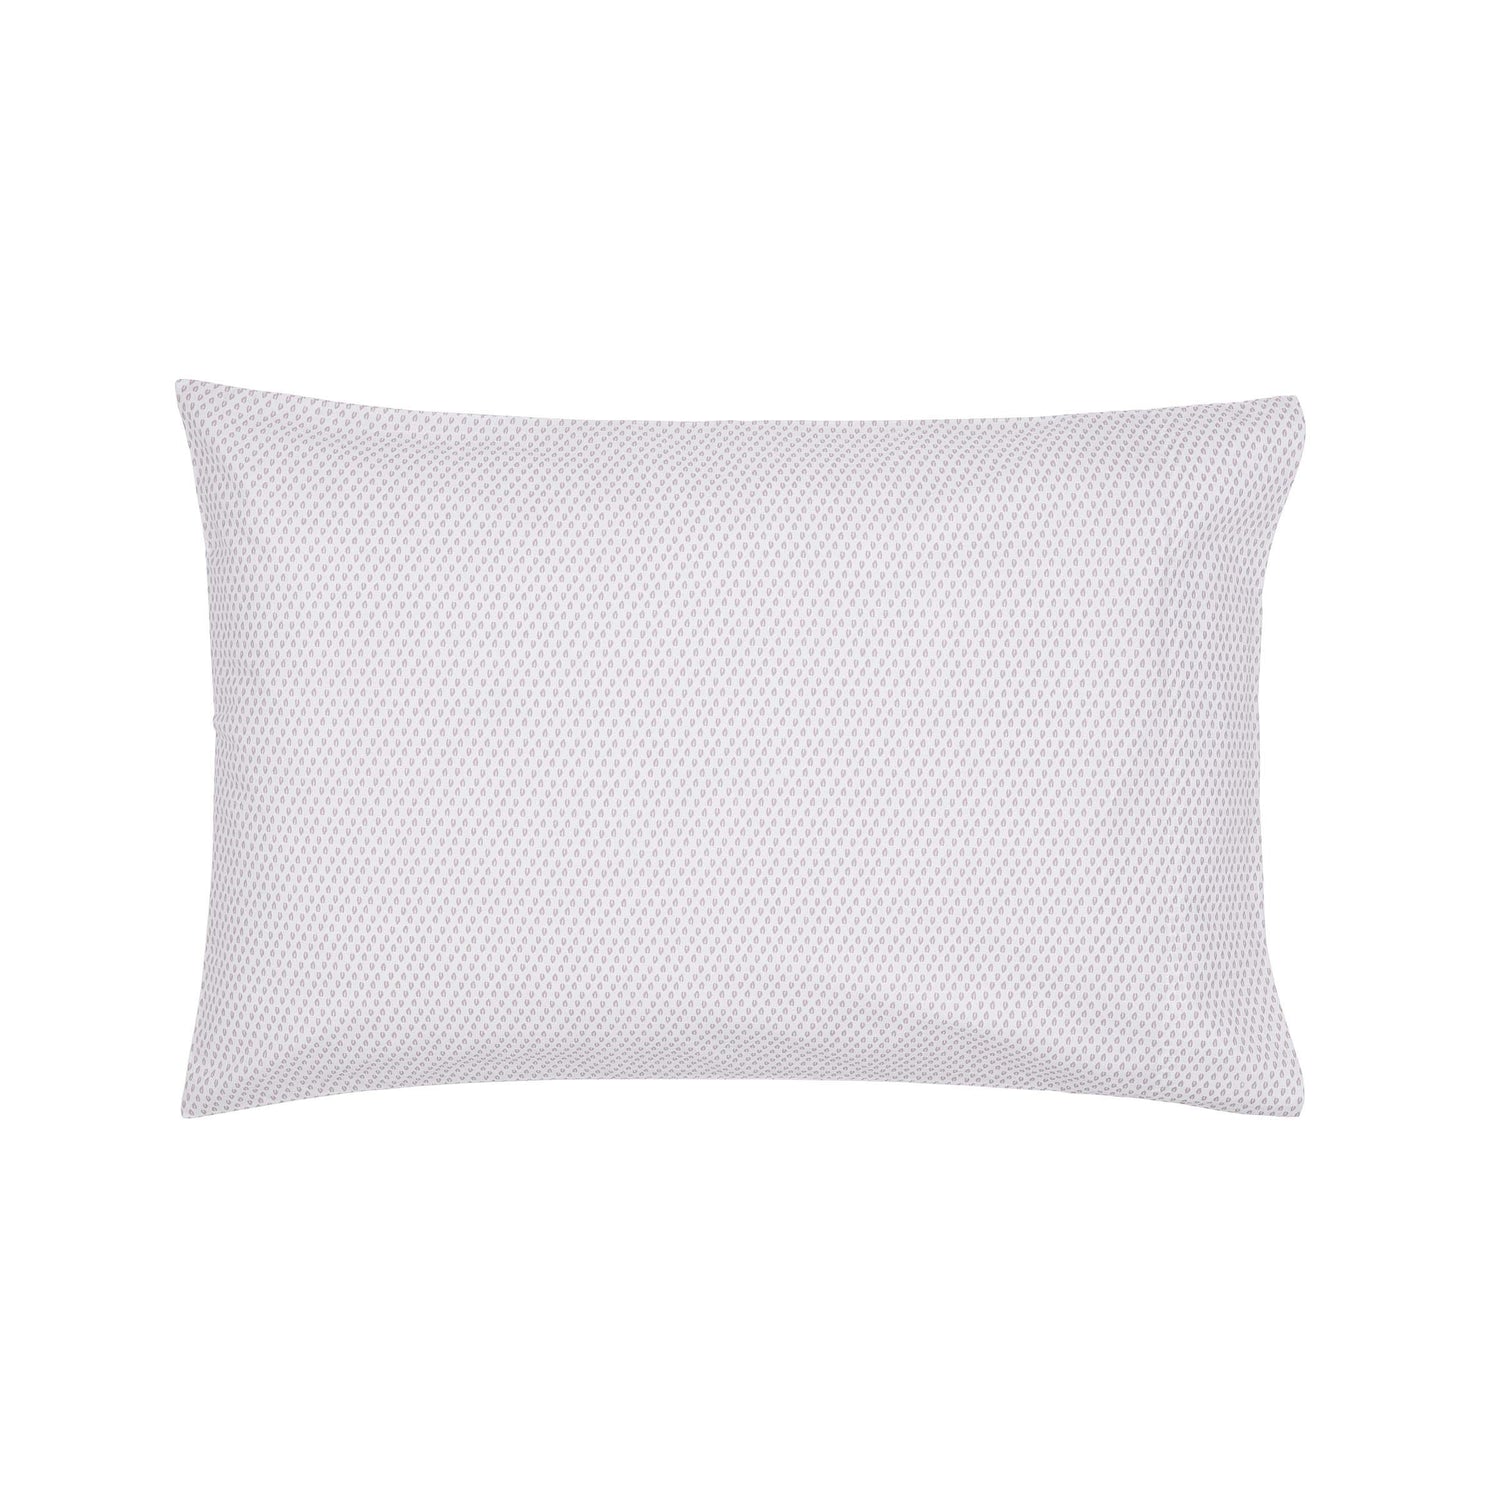 Thea Pair of Housewife Pillowcases Linen